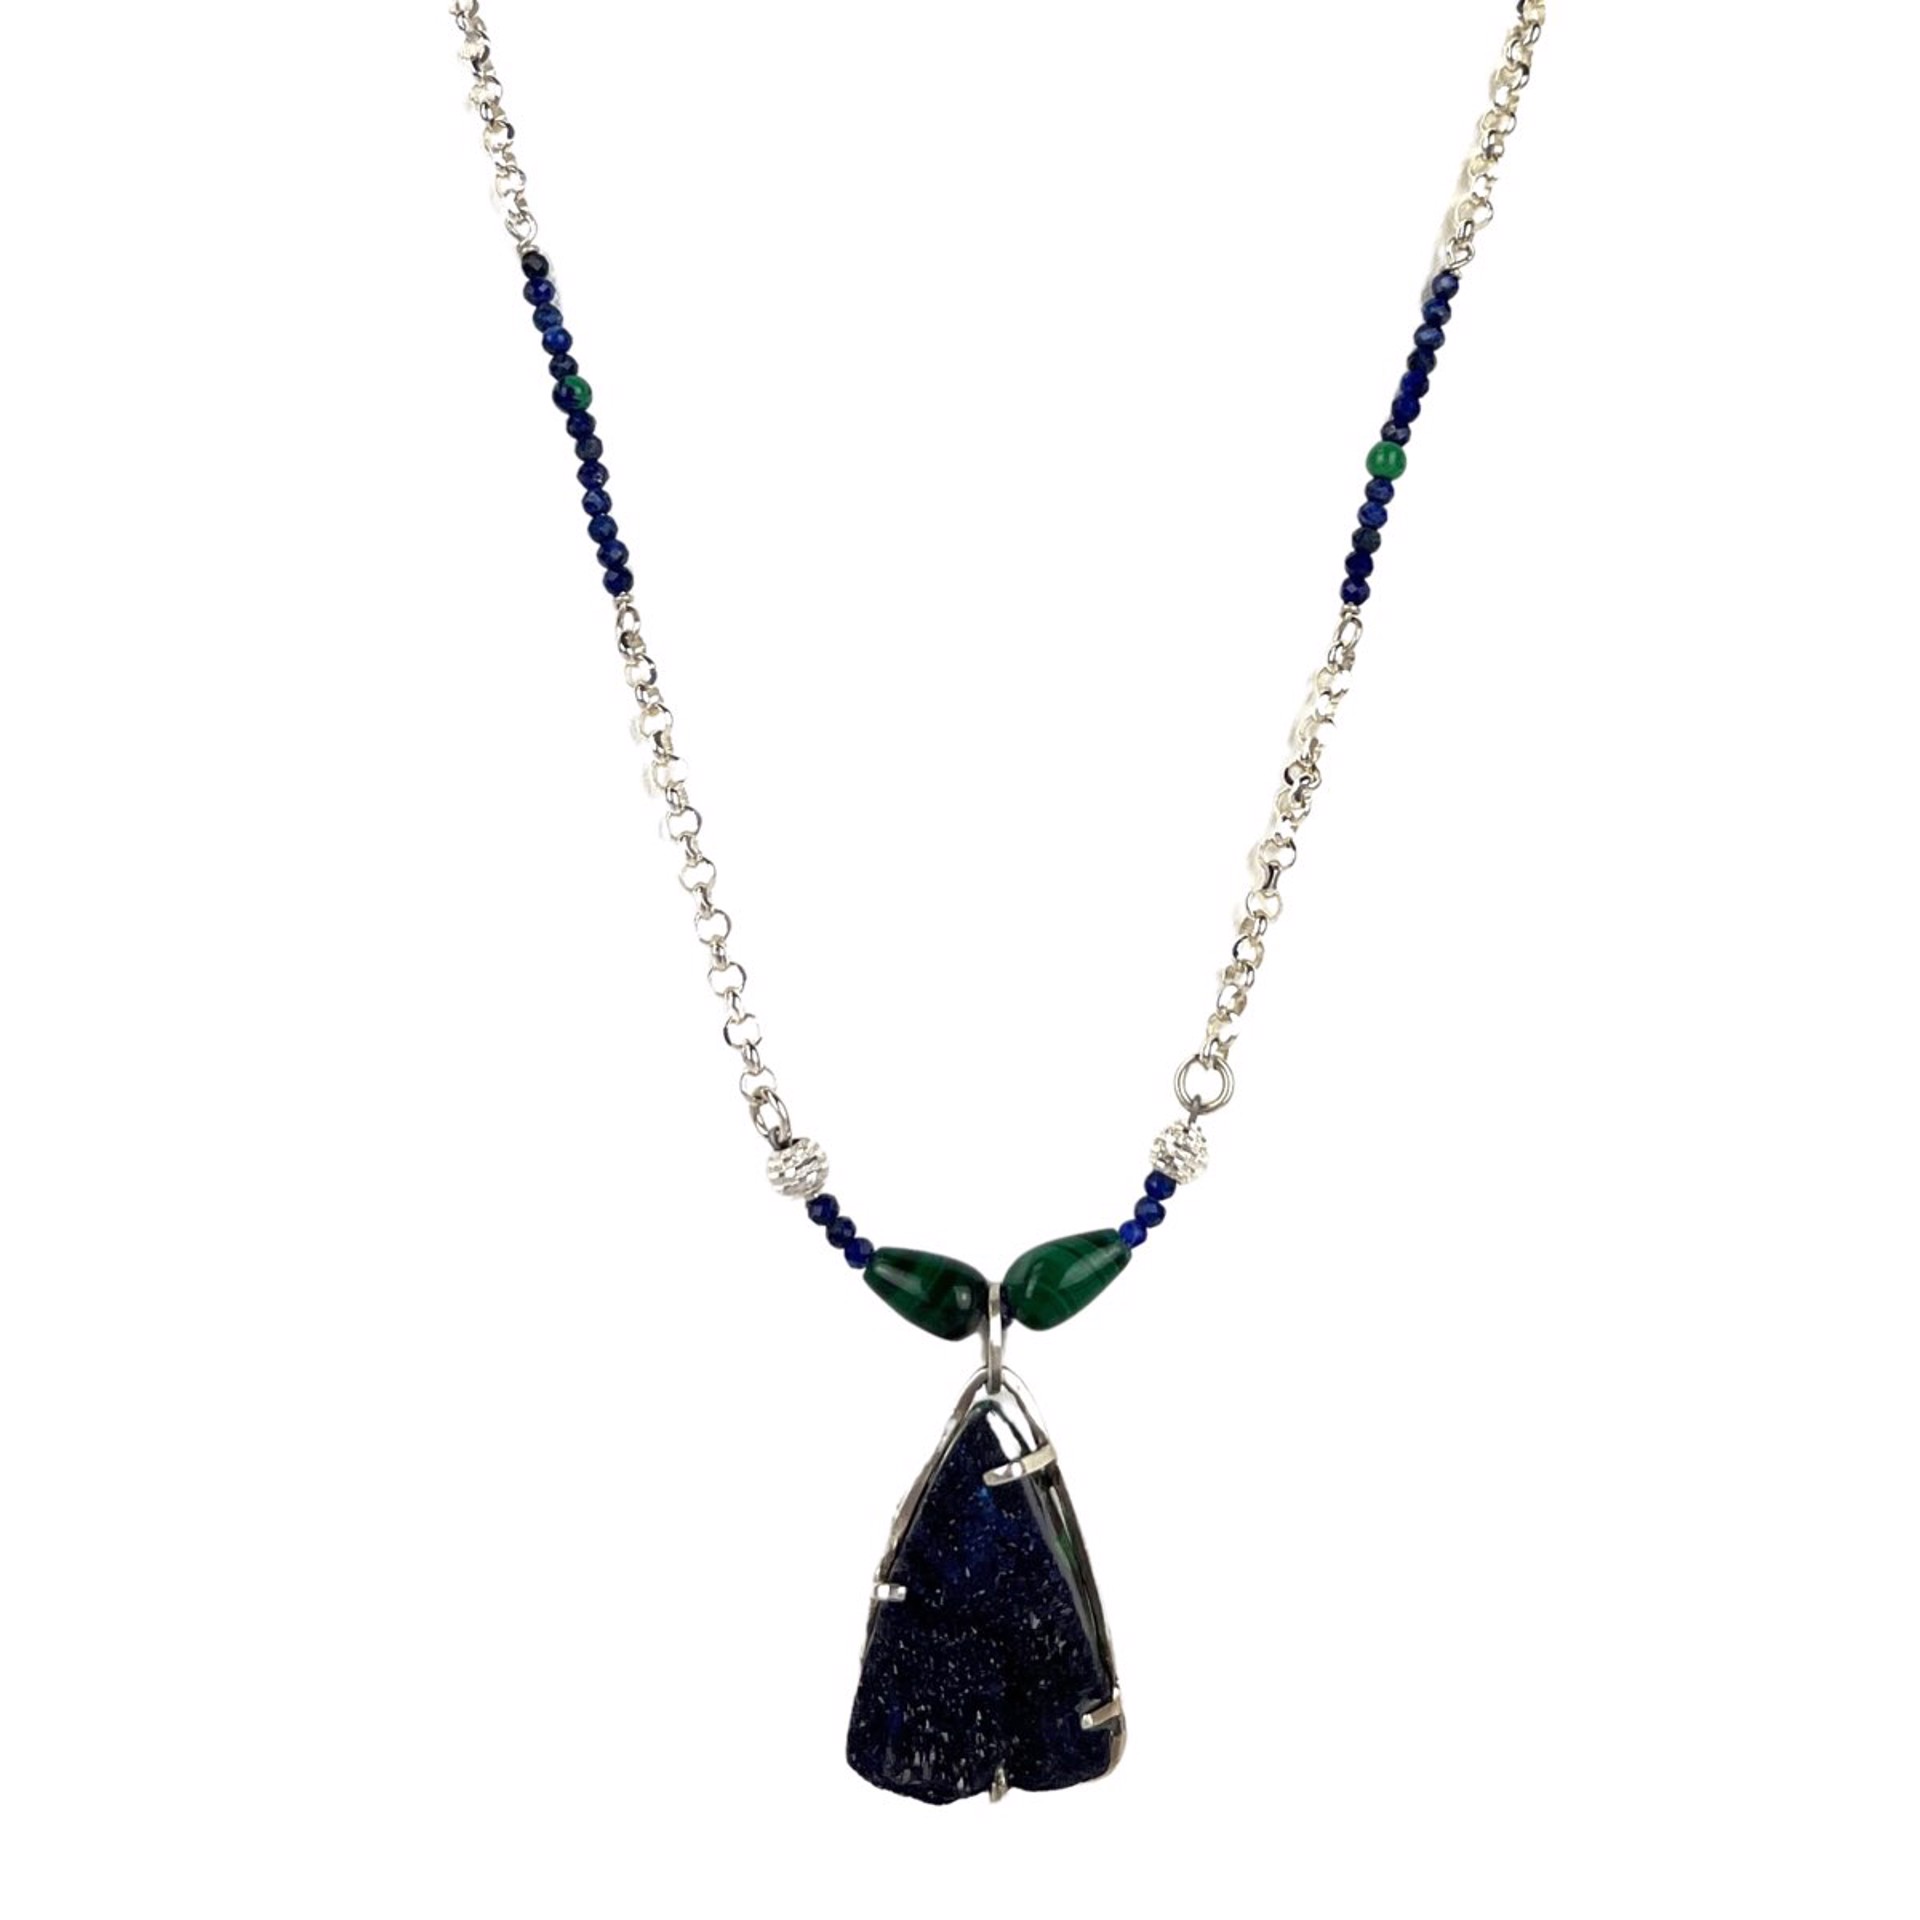 Chatoyant Malachite, Druzy Azurite, and Sterling Silver Necklace by Nola Smodic